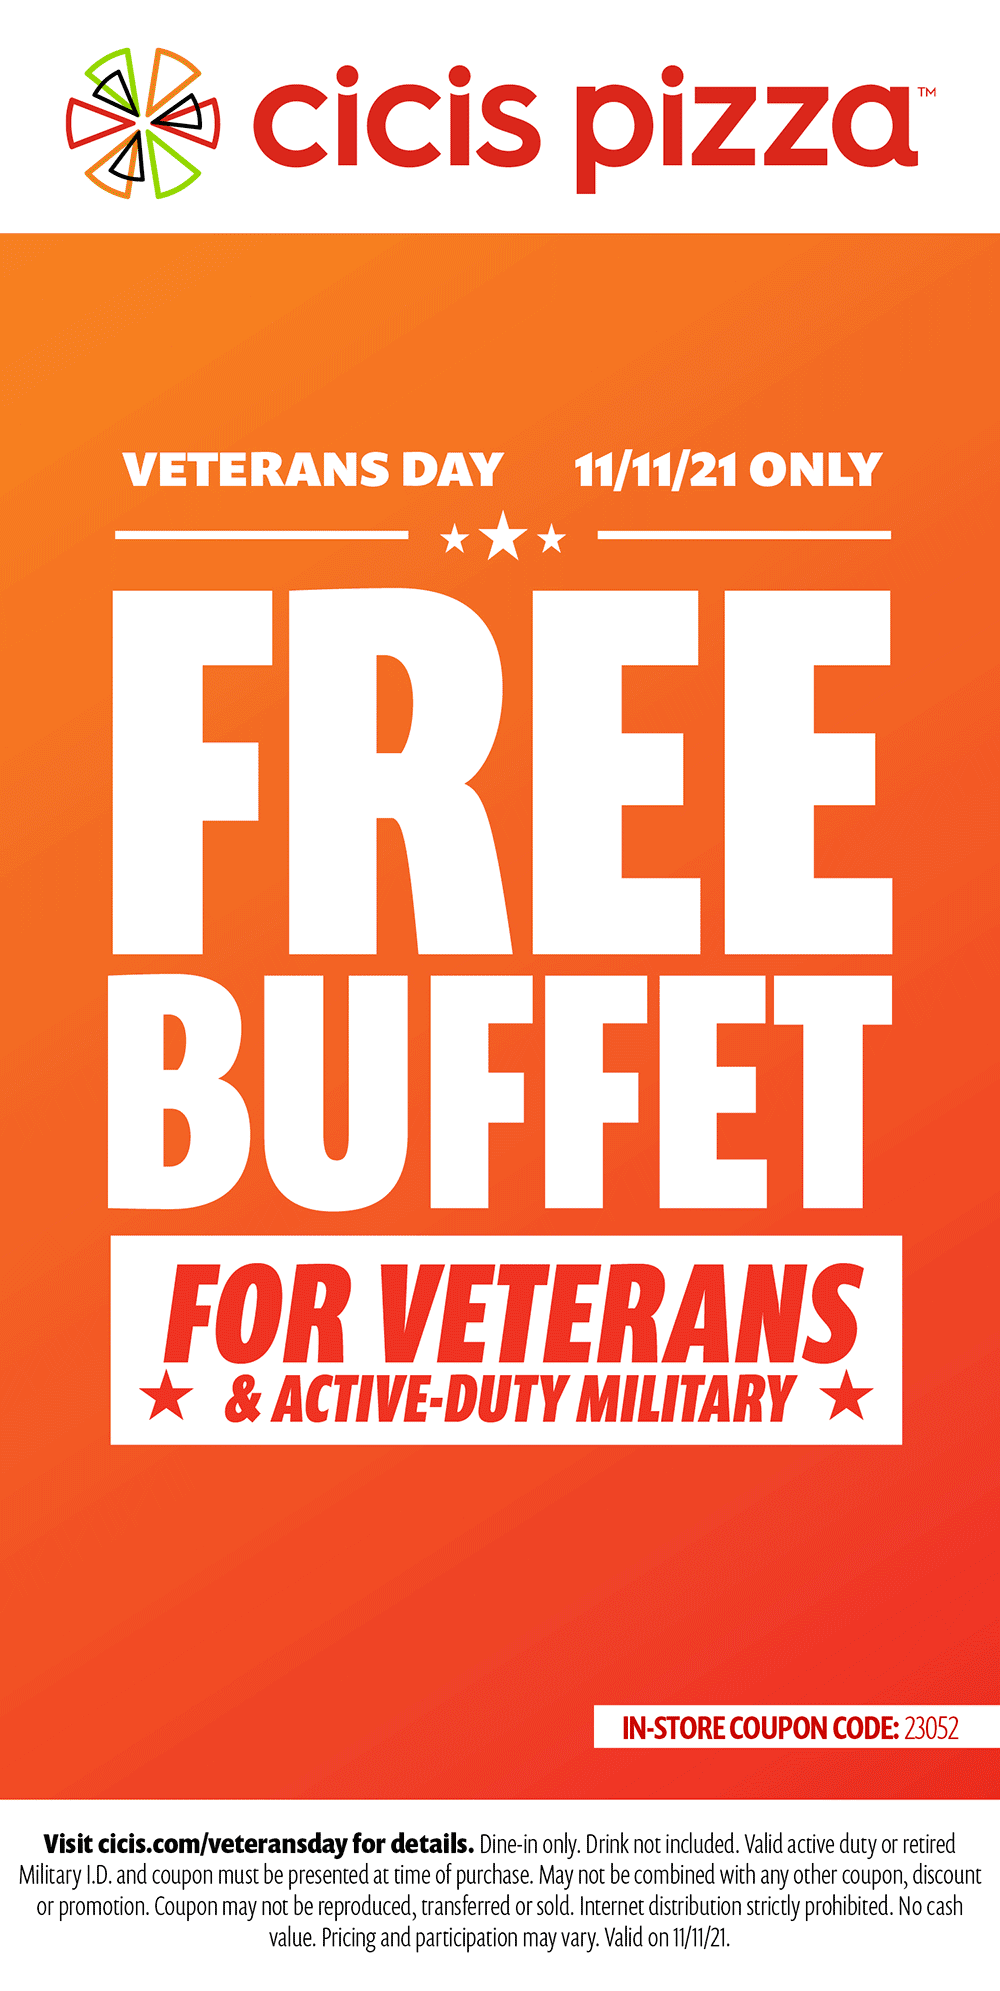 Cicis Pizza Veterans Day FREE Adult Buffet Military Veterans